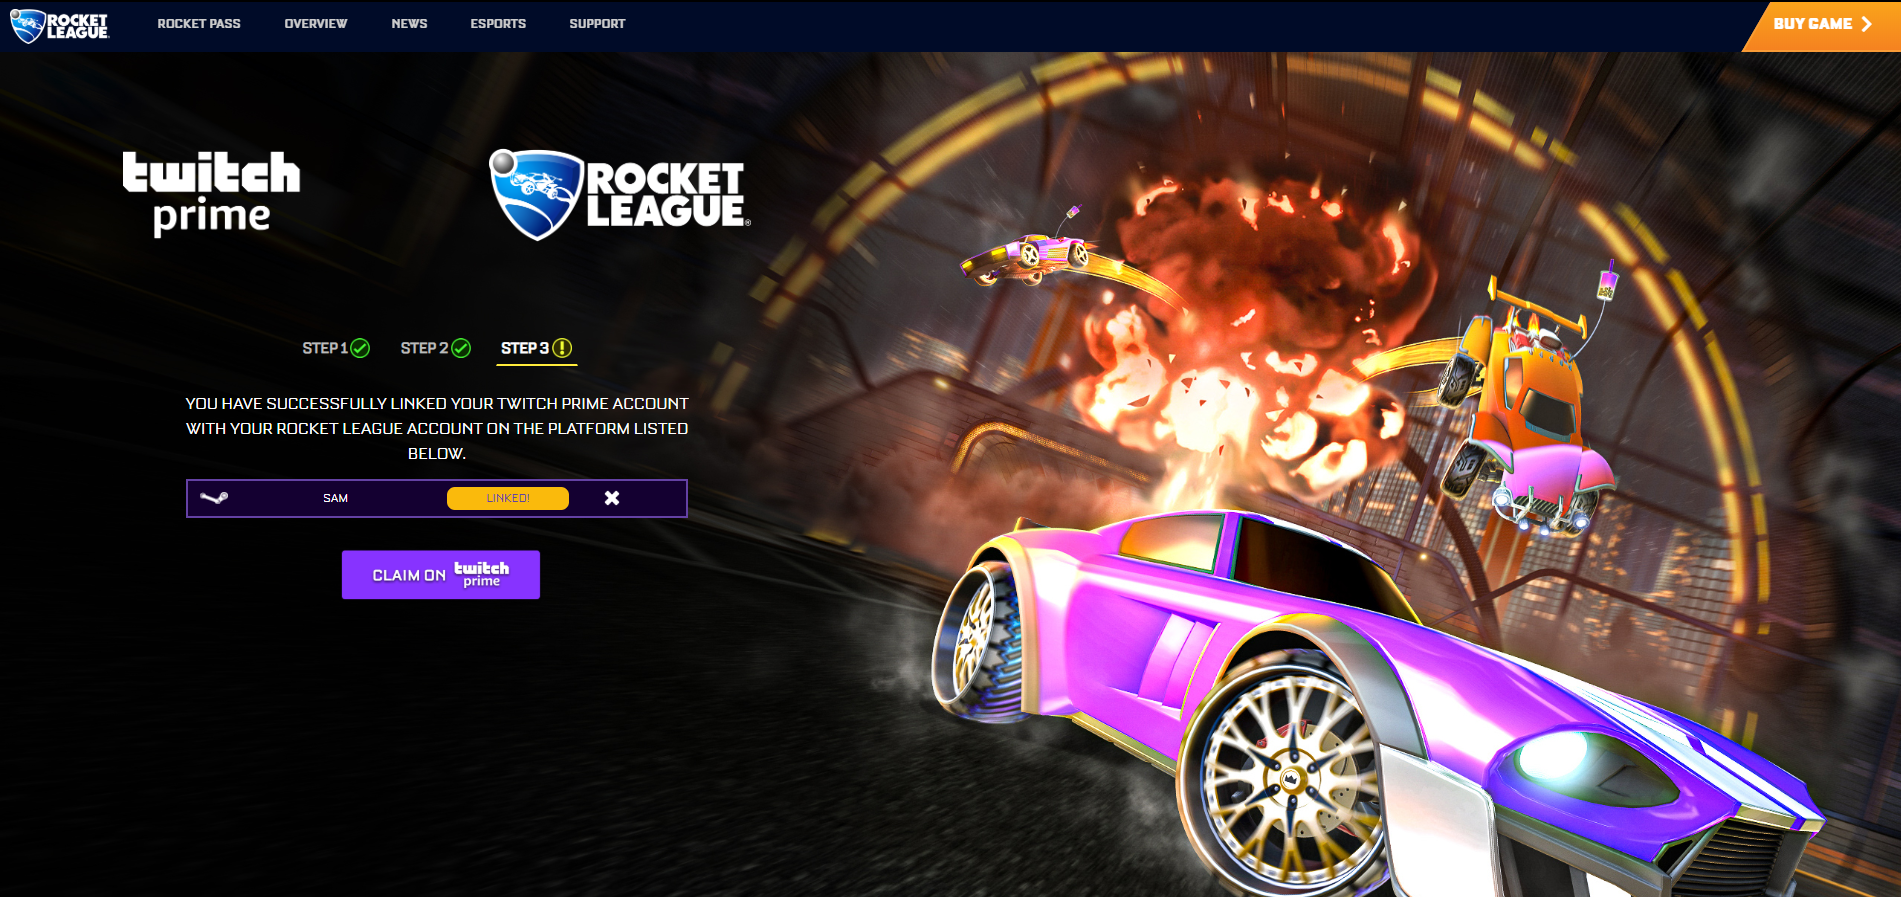 Abusing HTTP Path Normalization and Cache Poisoning to steal Rocket League accounts